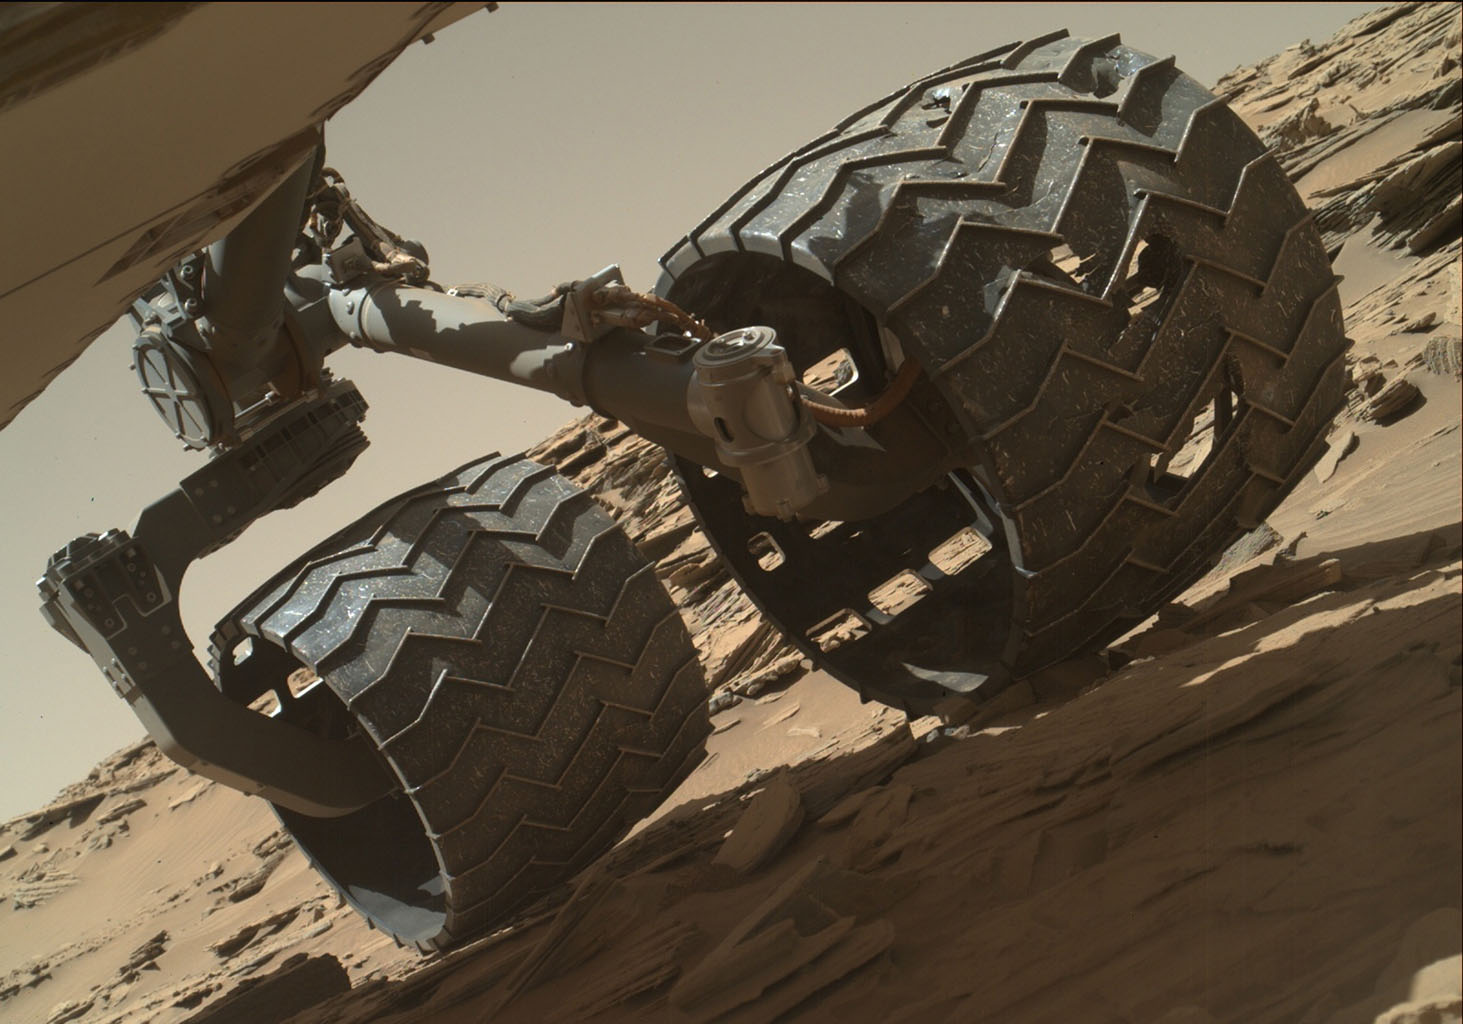 Routine Inspection of Rover Wheel Wear and Tear